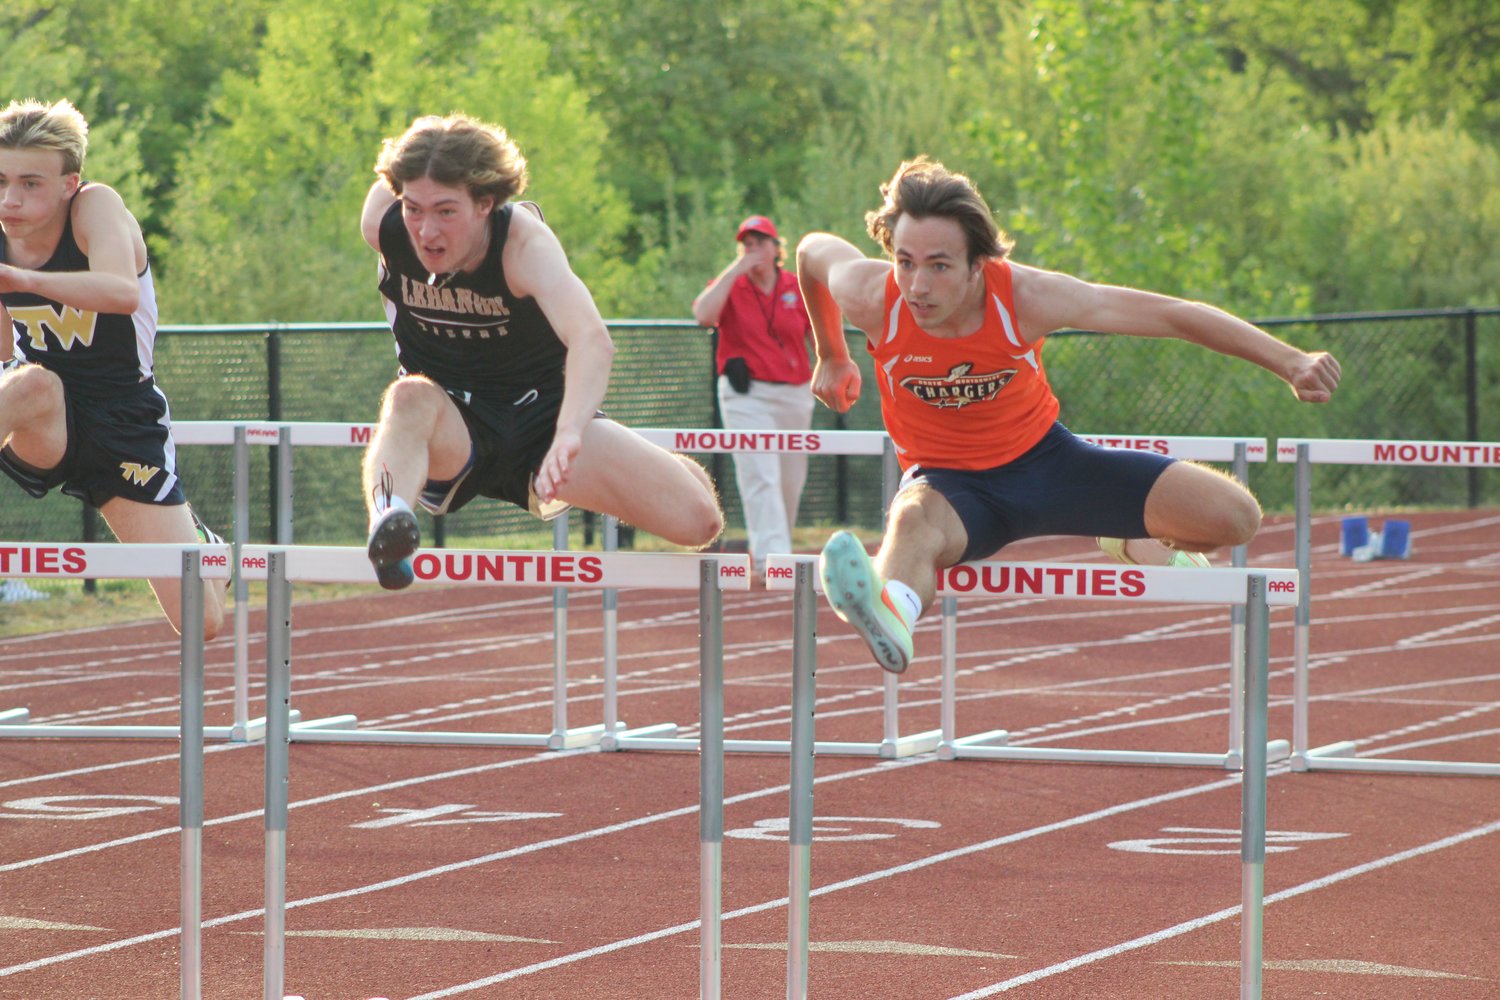 North Montgomery's Gabe Laws had a strong showing being named the SAC champion in the 300 meter hurdles.